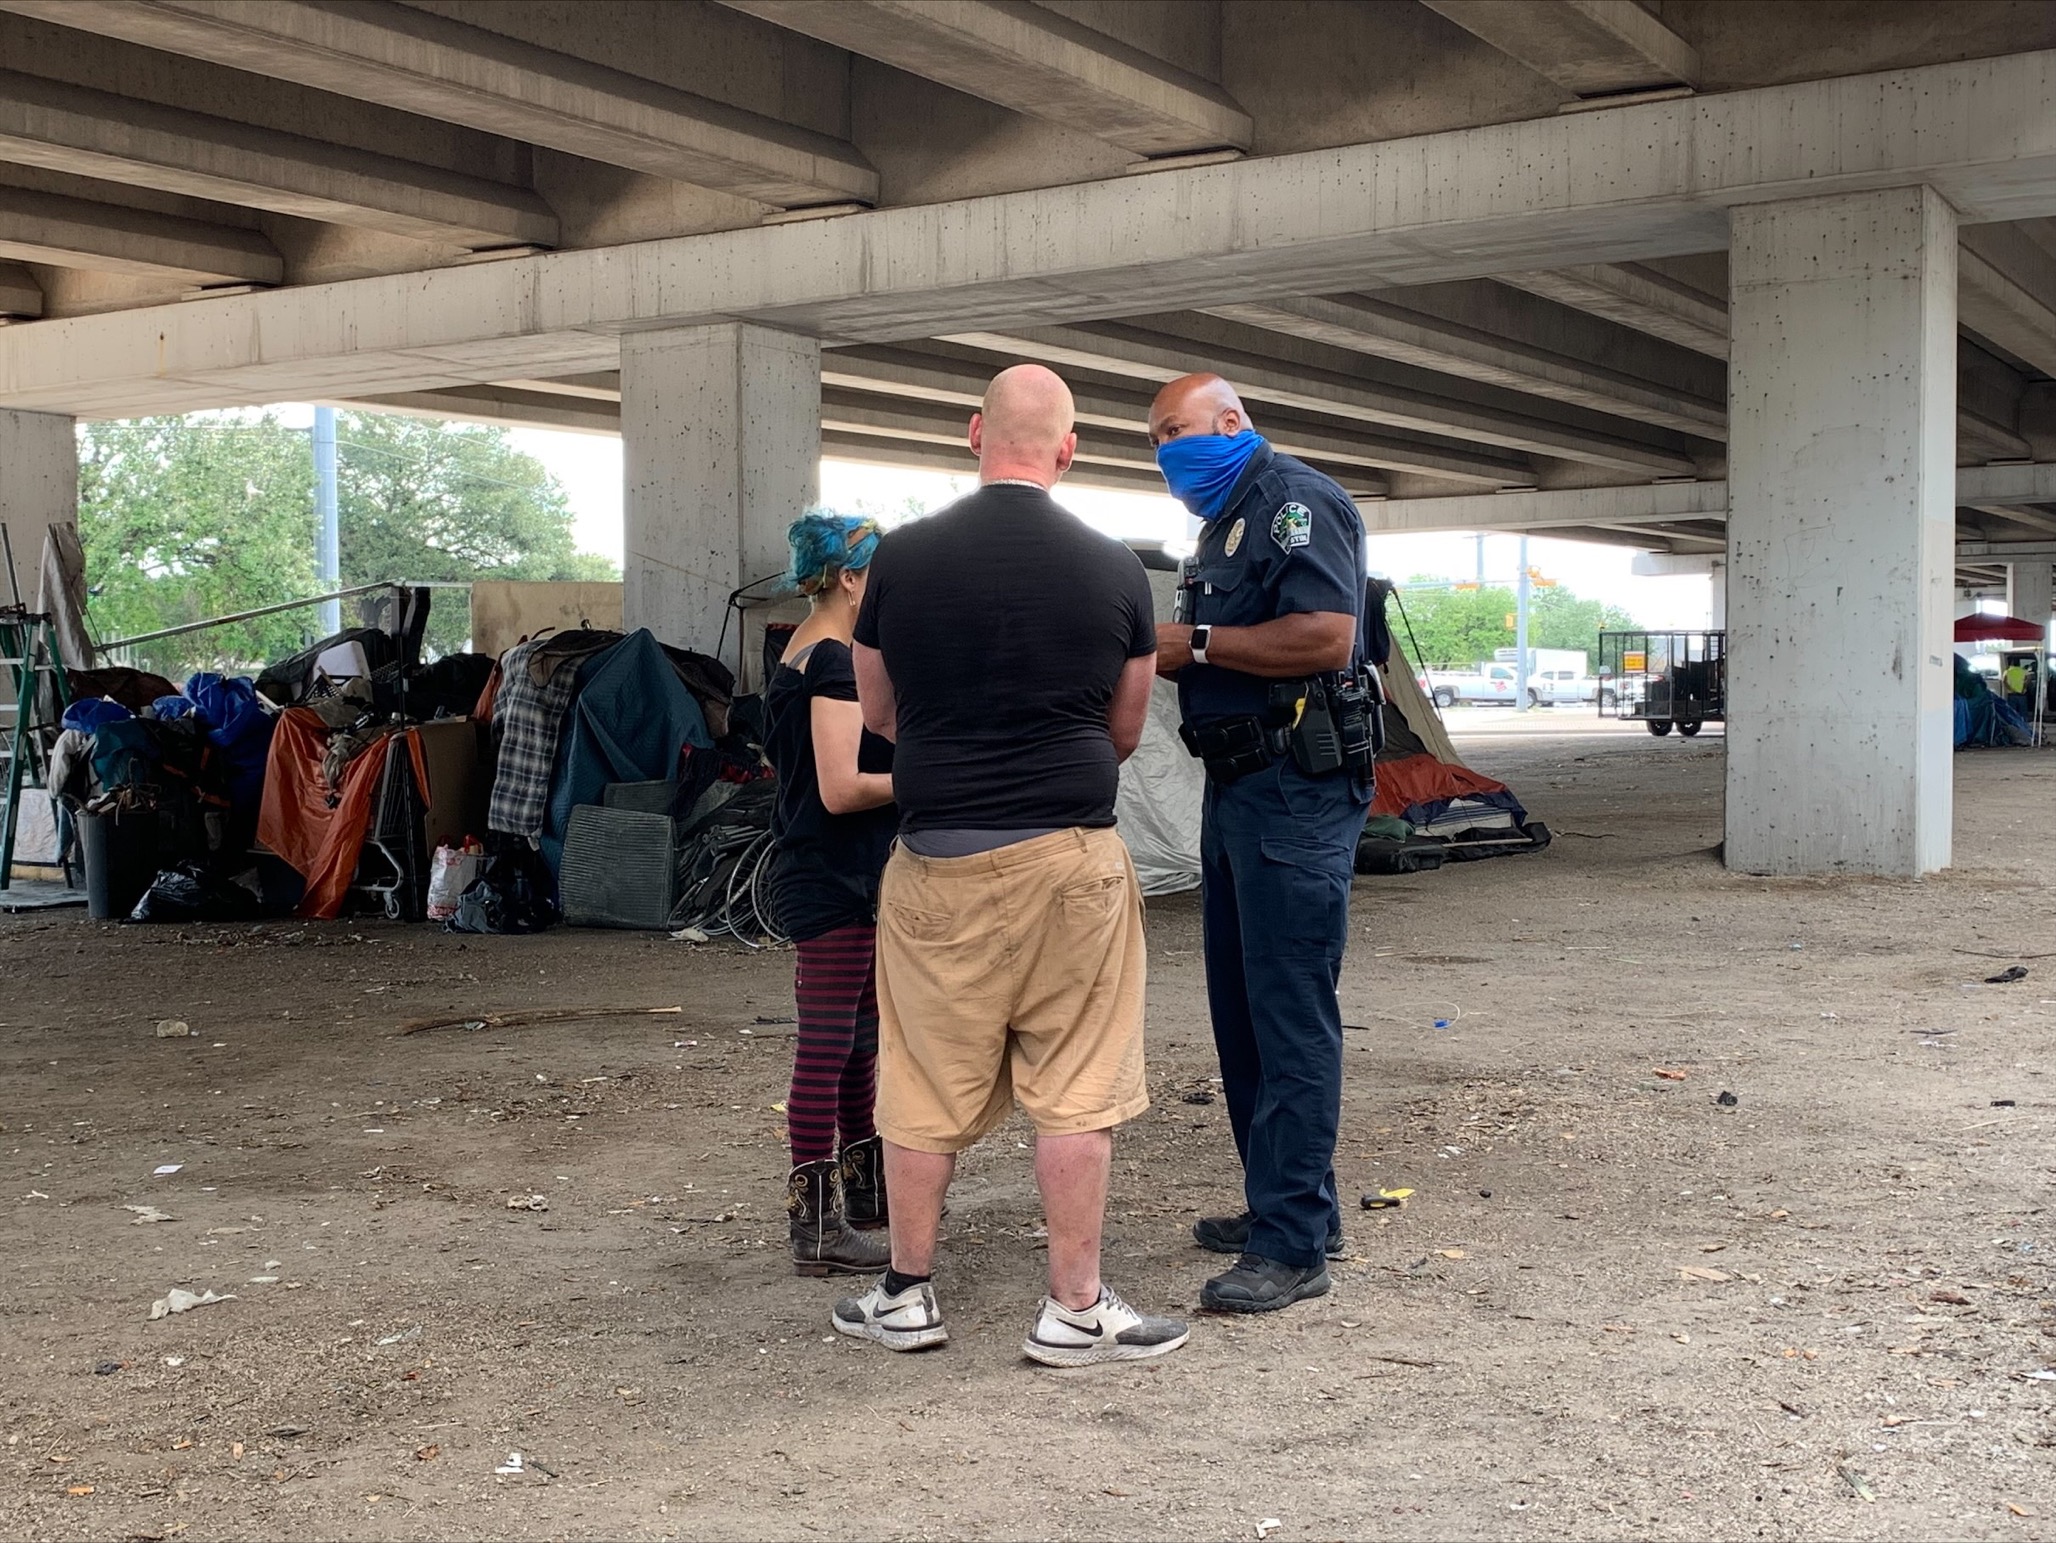 Image of Austin Police Officers visiting an encampment